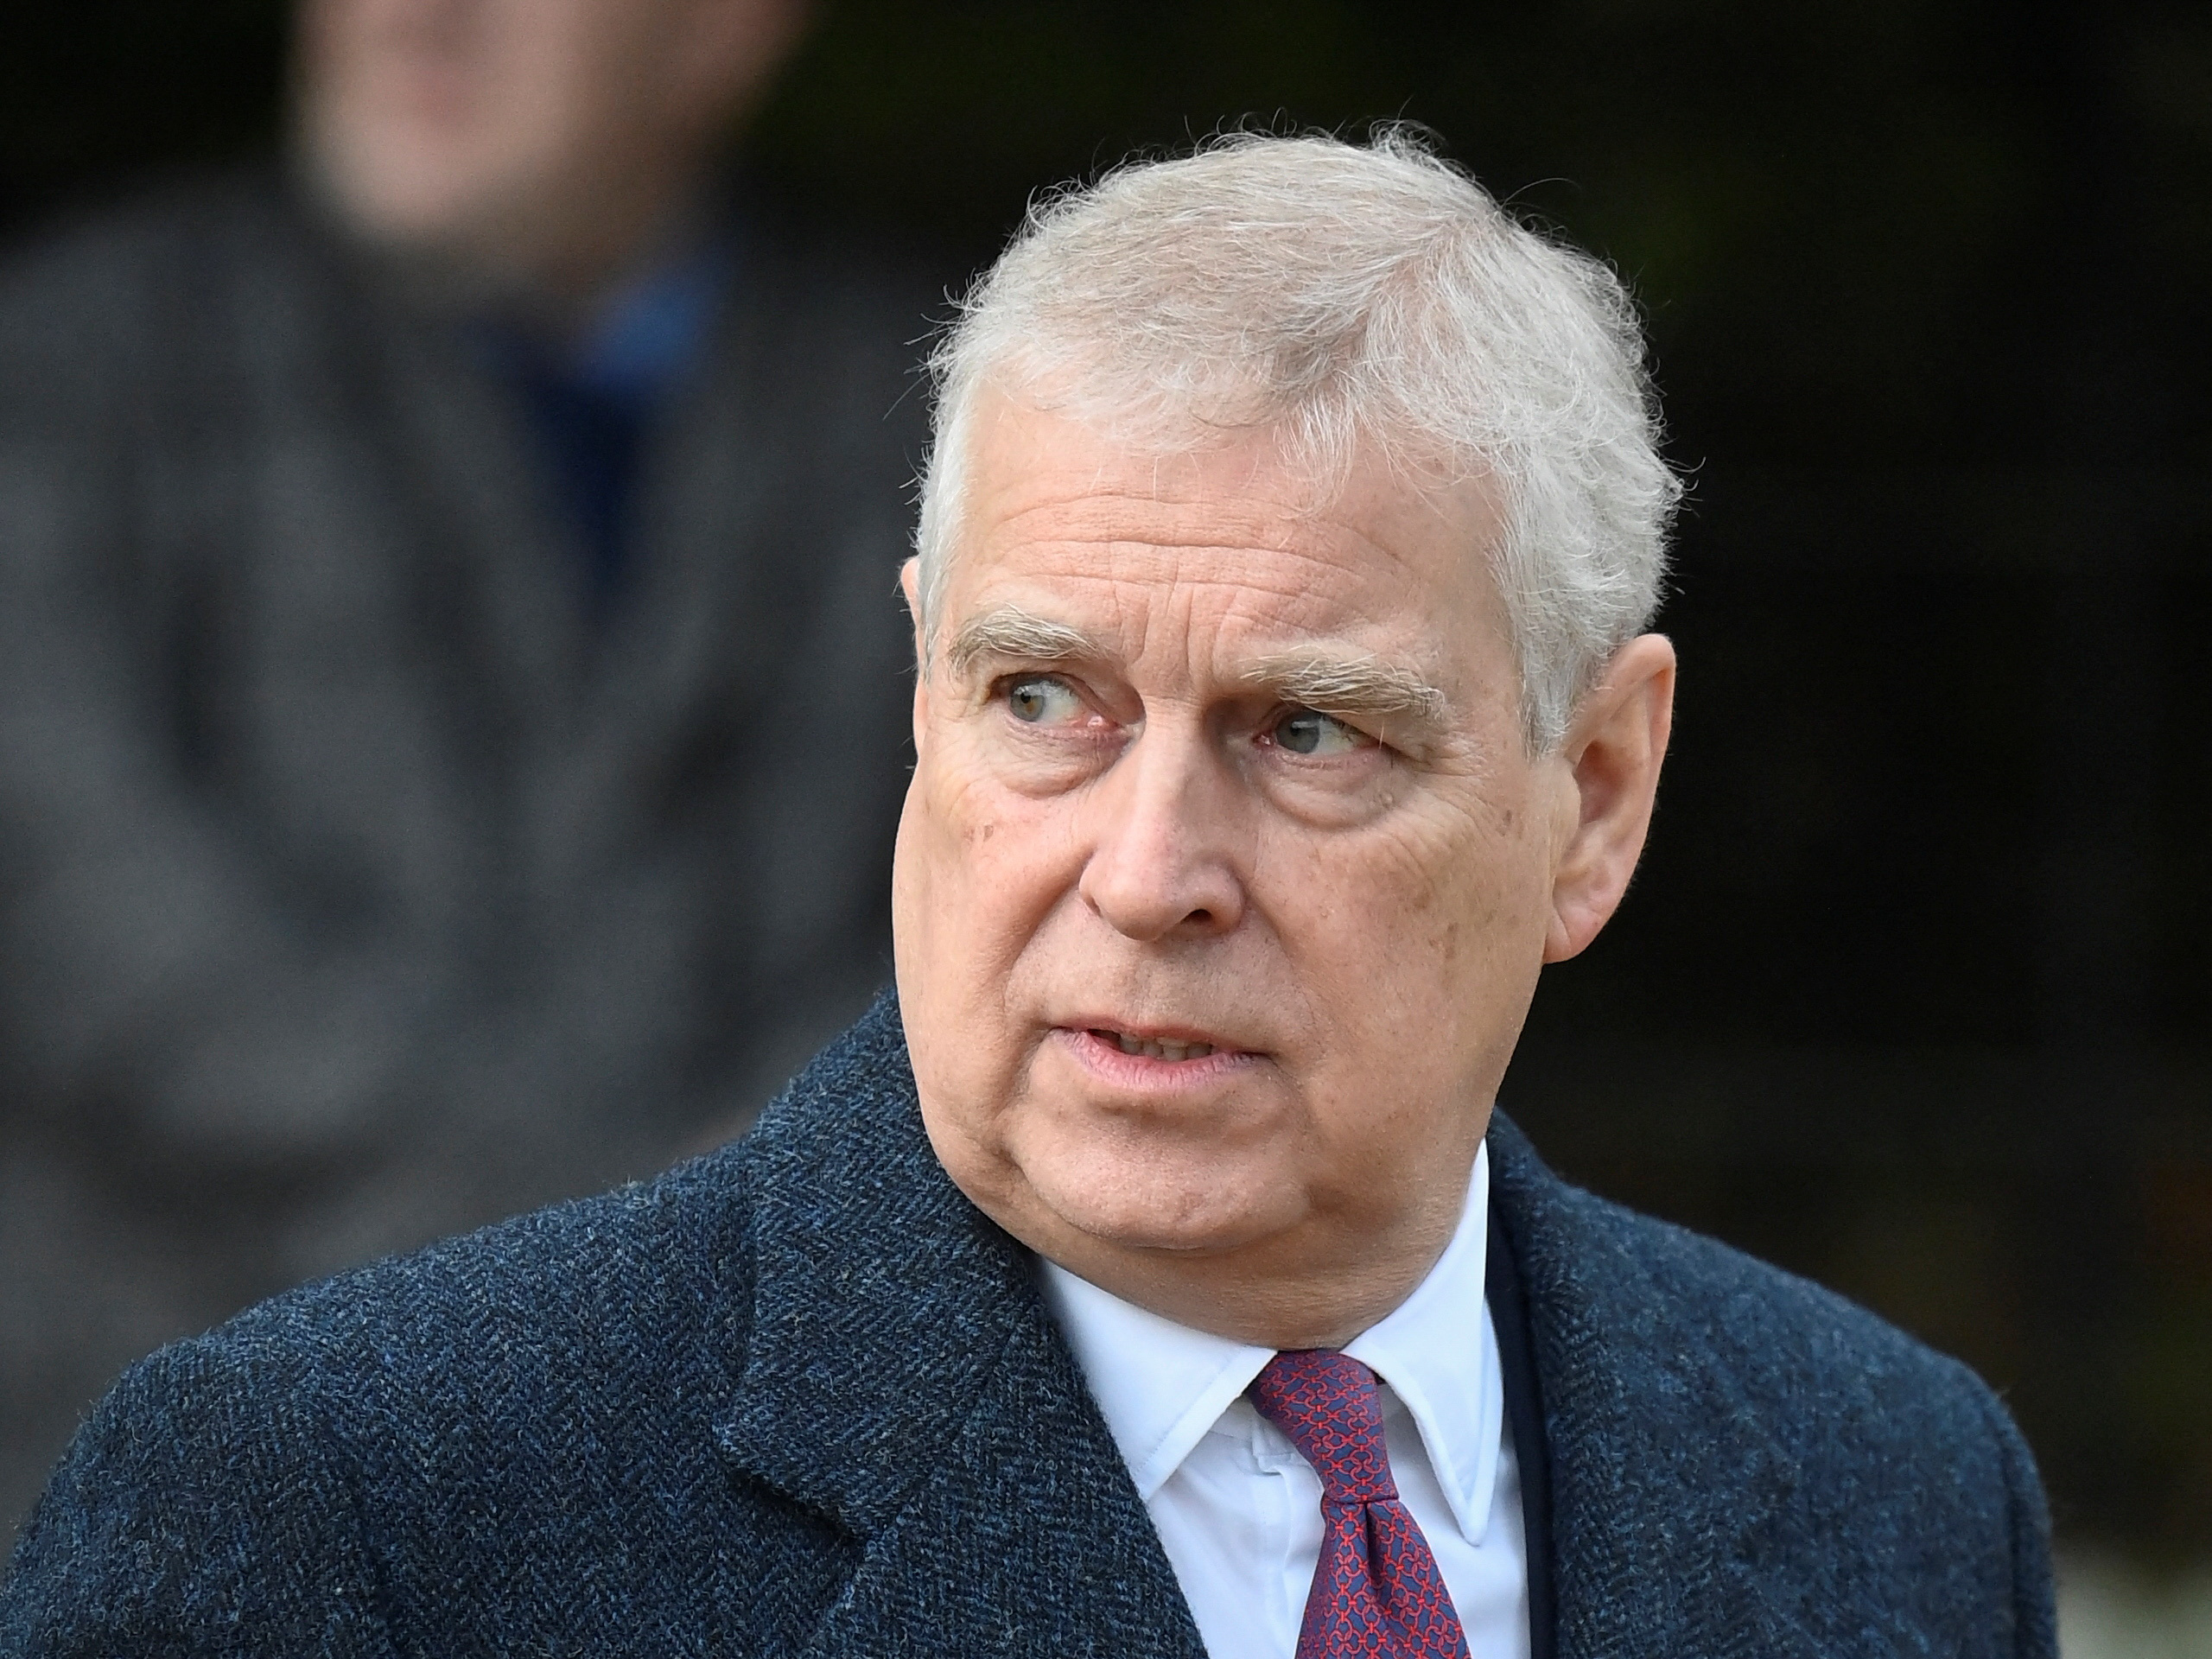 King Charles brother Prince Andrew still casts a cloud over monarchy Reuters image